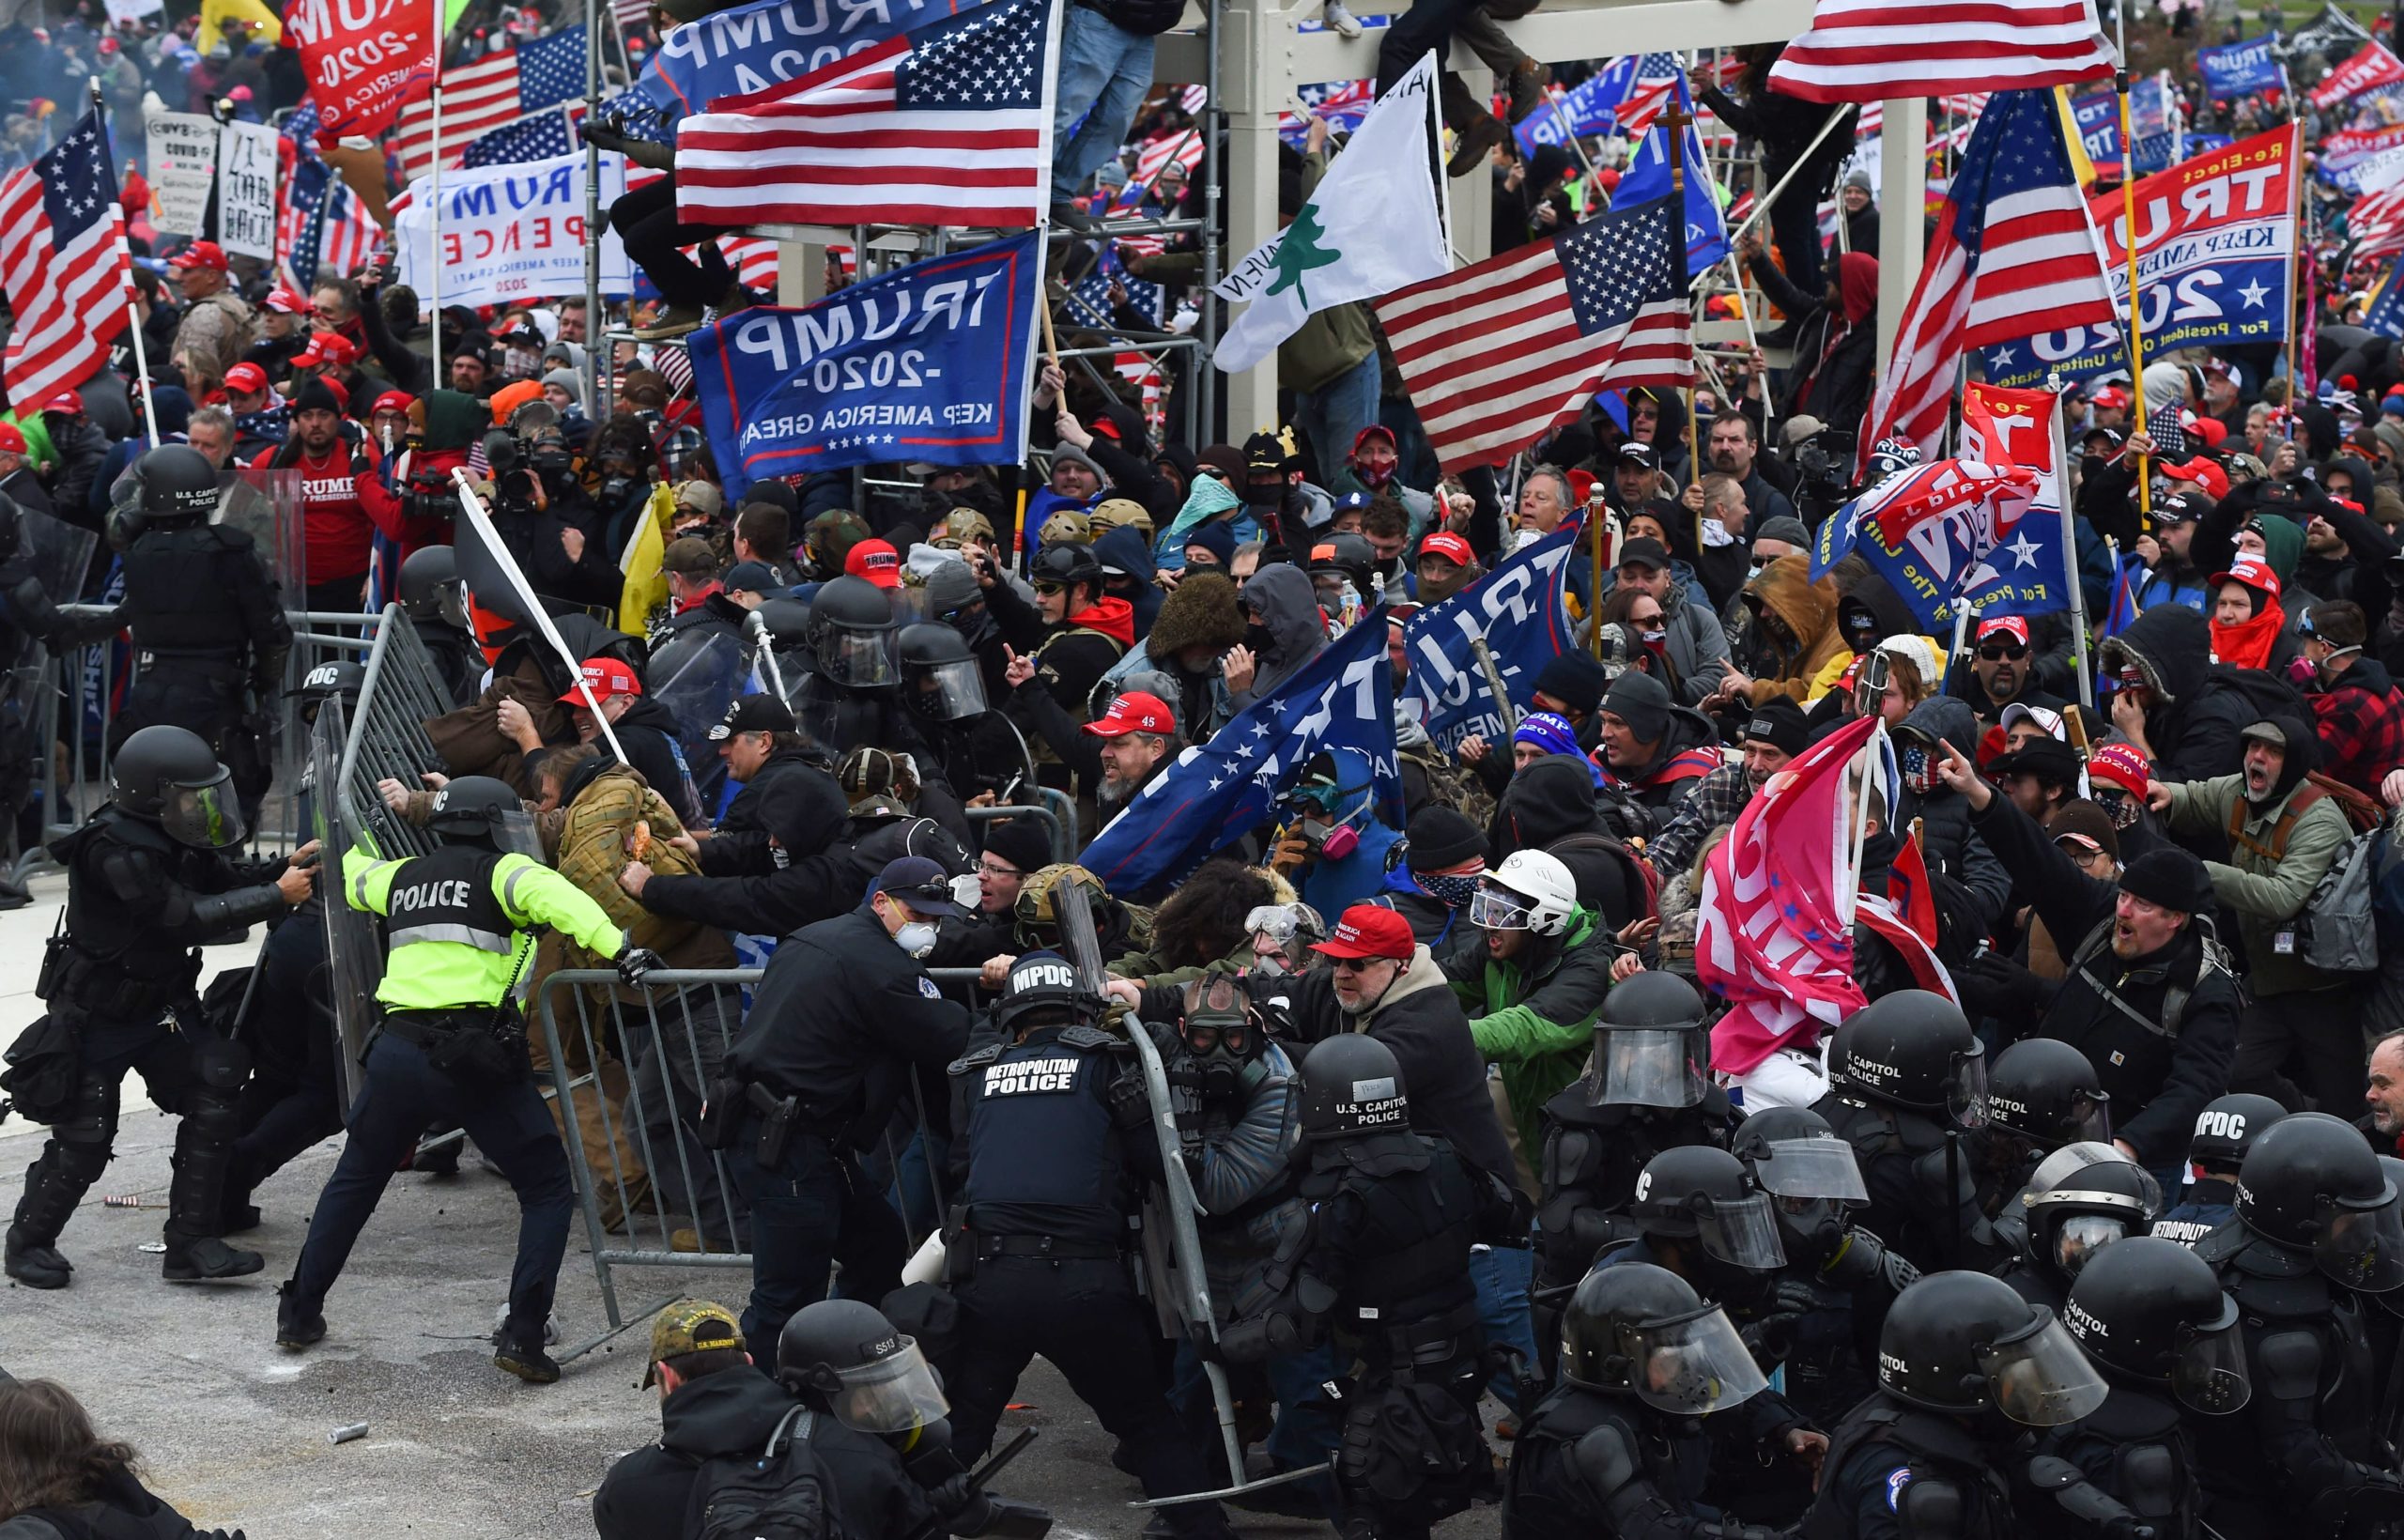 Trump supporters clash with police and security forces as they push barricades in front of the U.S. Capitol on Jan. 6. (Roberto Schmidt/AFP via Getty Images)